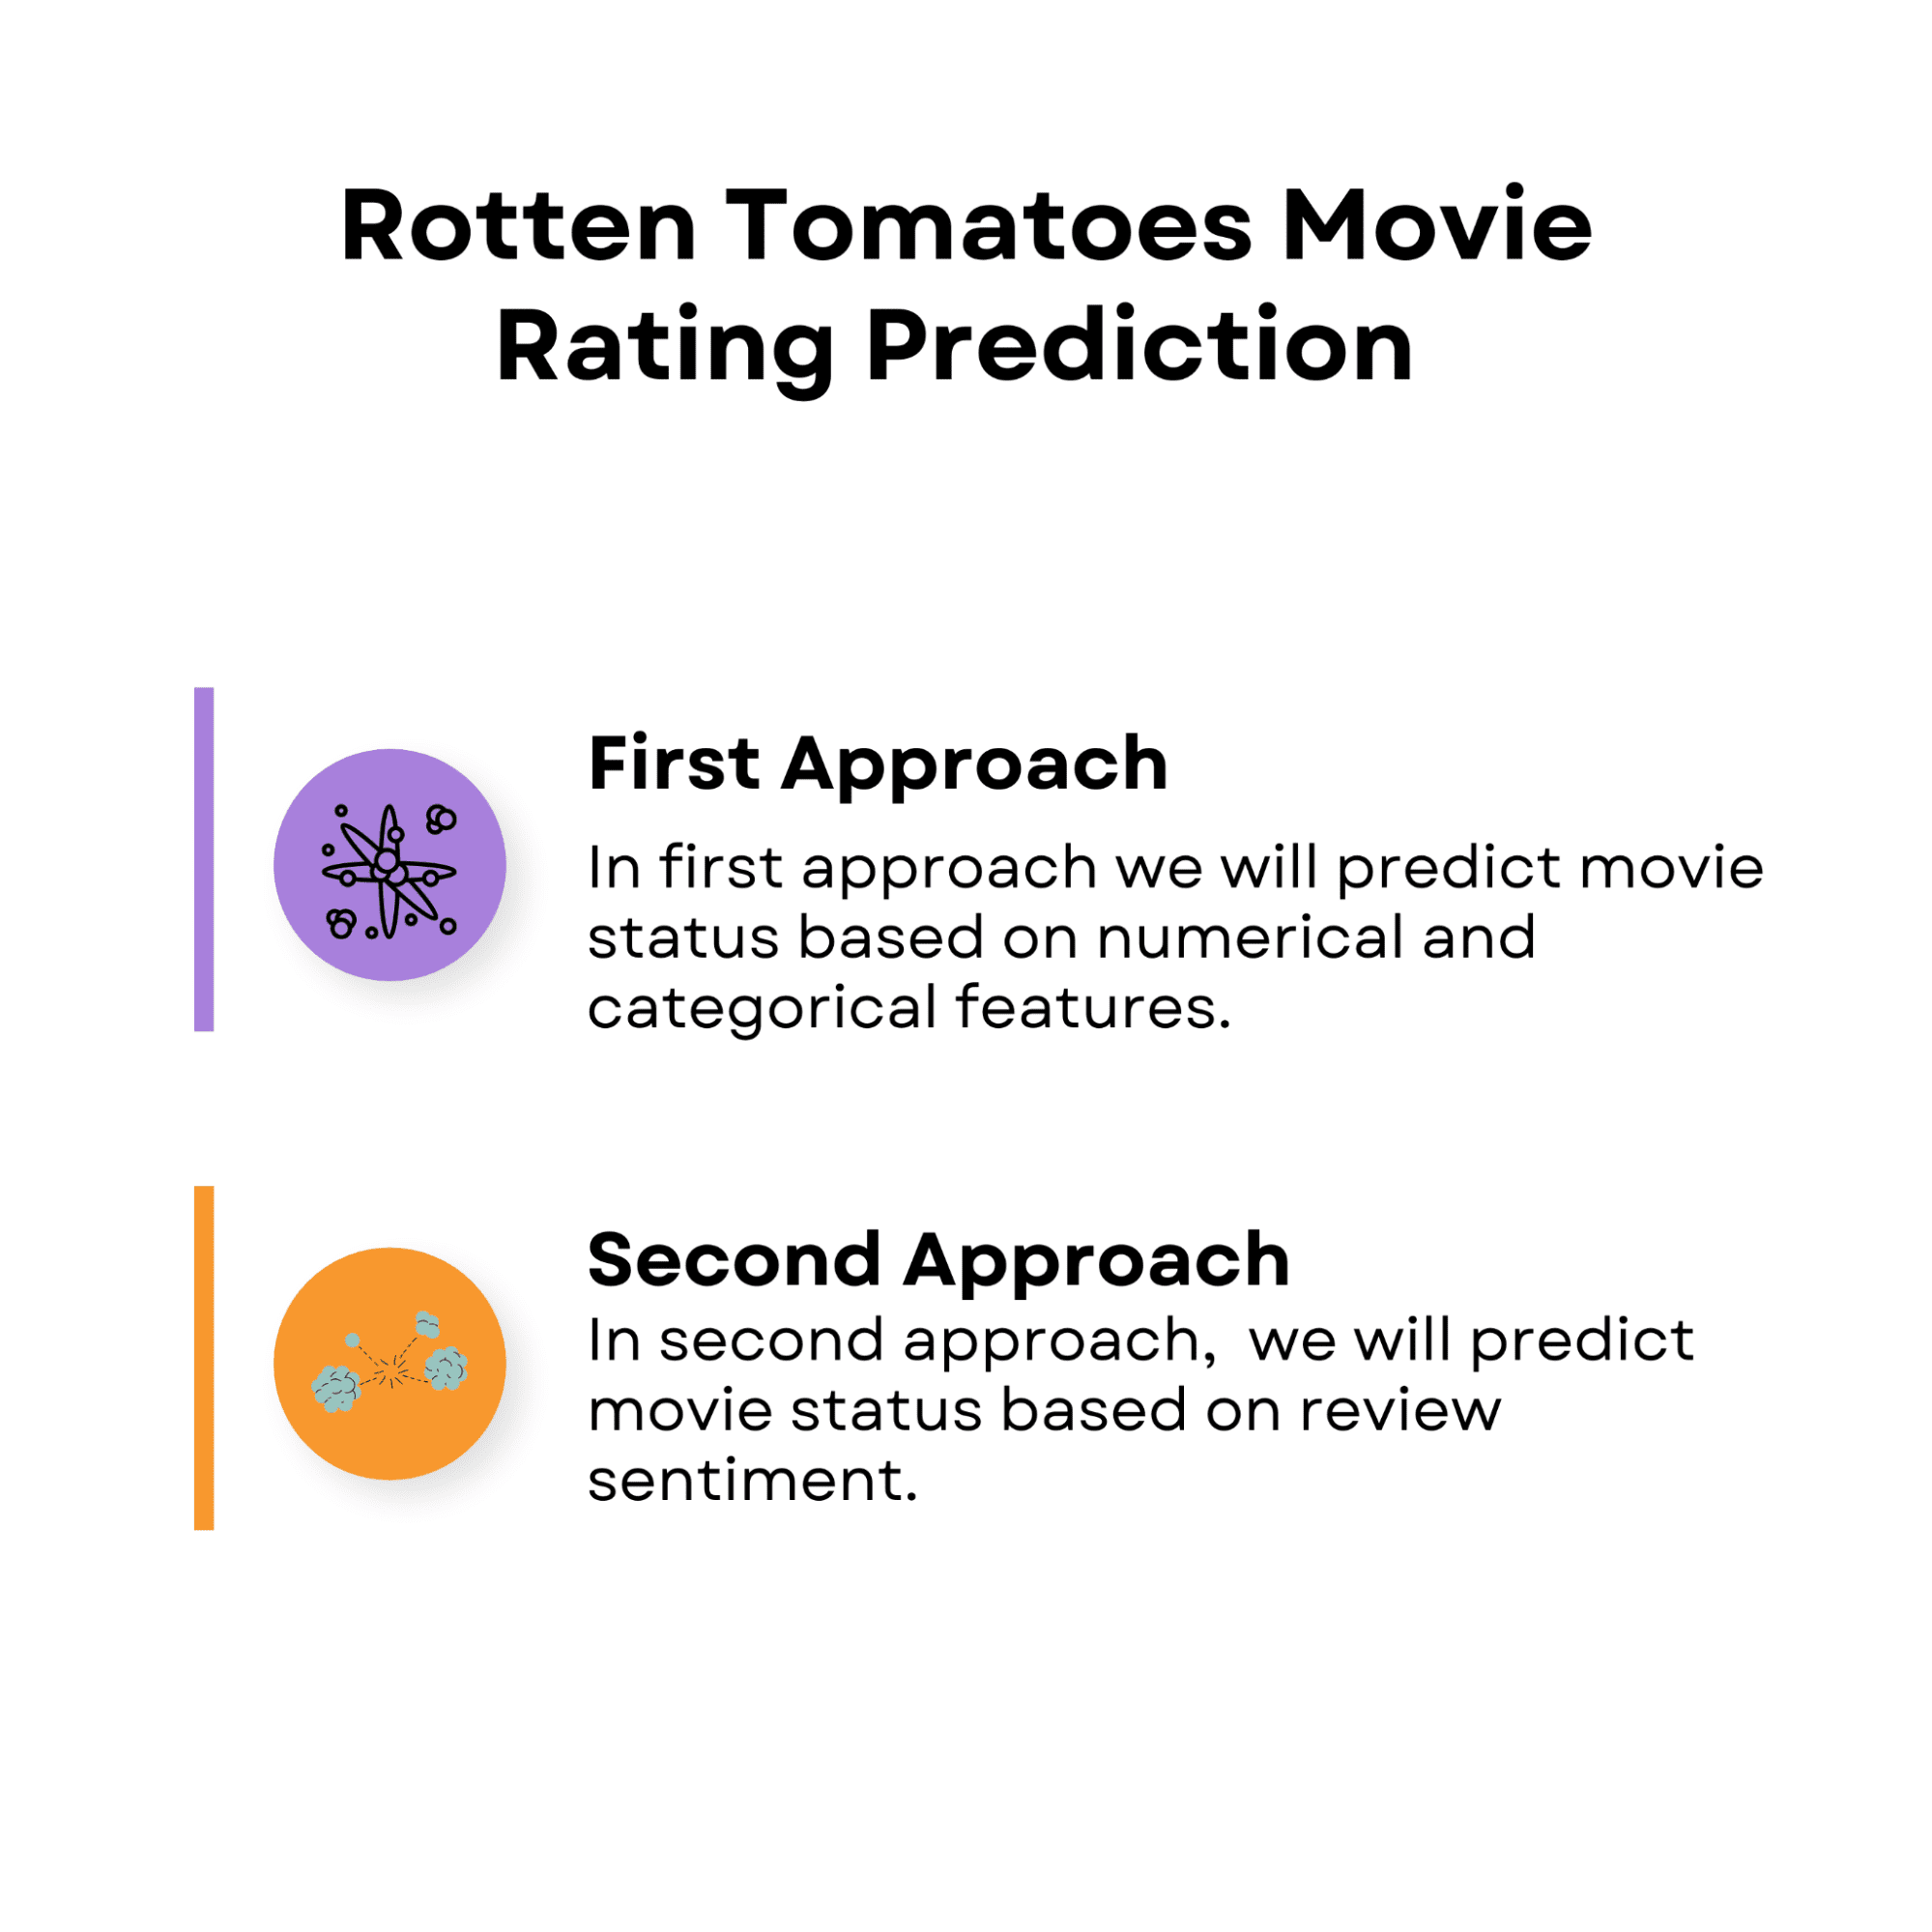 Data Science Project of Rotten Tomatoes Movie Rating Prediction: Second Approach